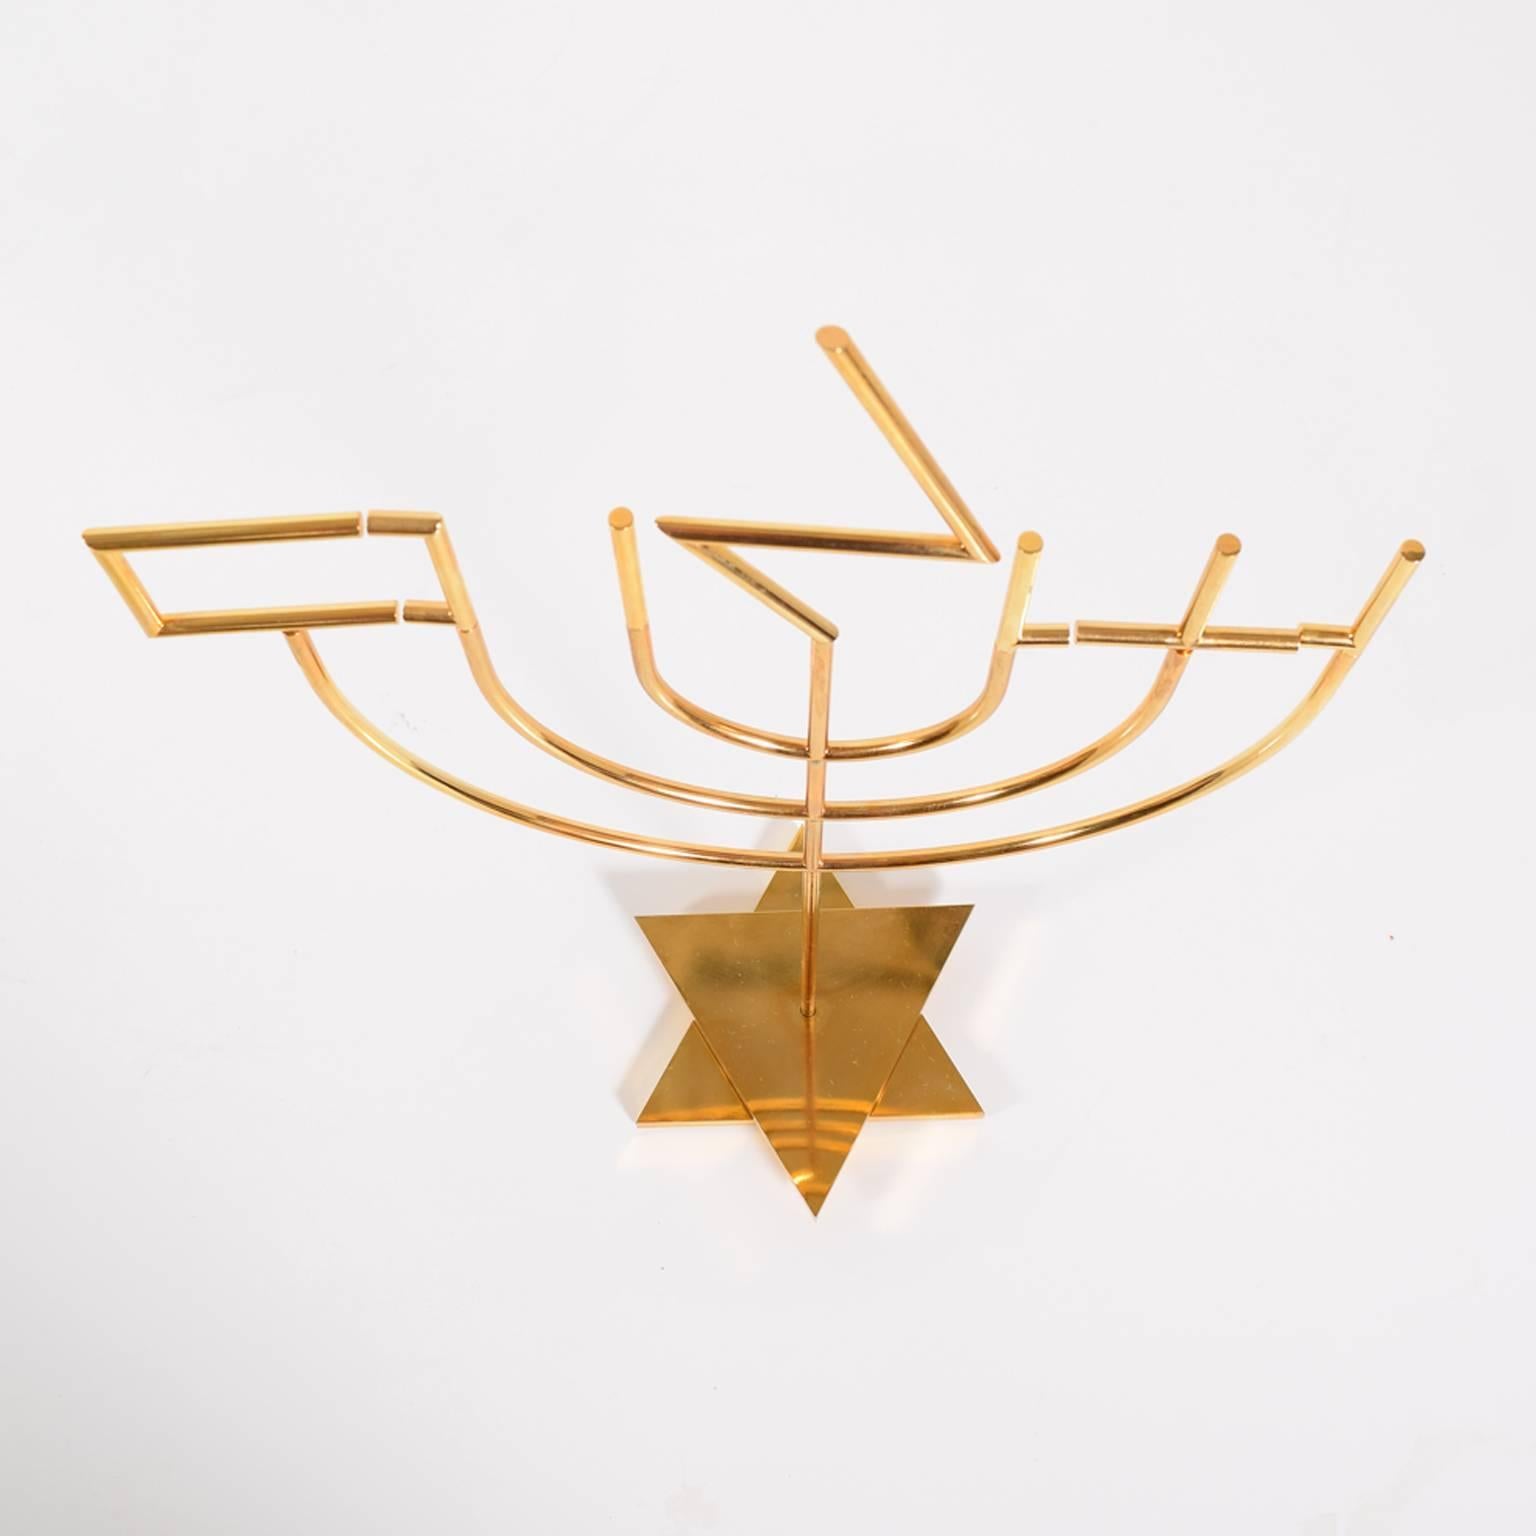 Modern Sculpture by Yaacov Agam ‘Peace Candelabra’ Edition of 180